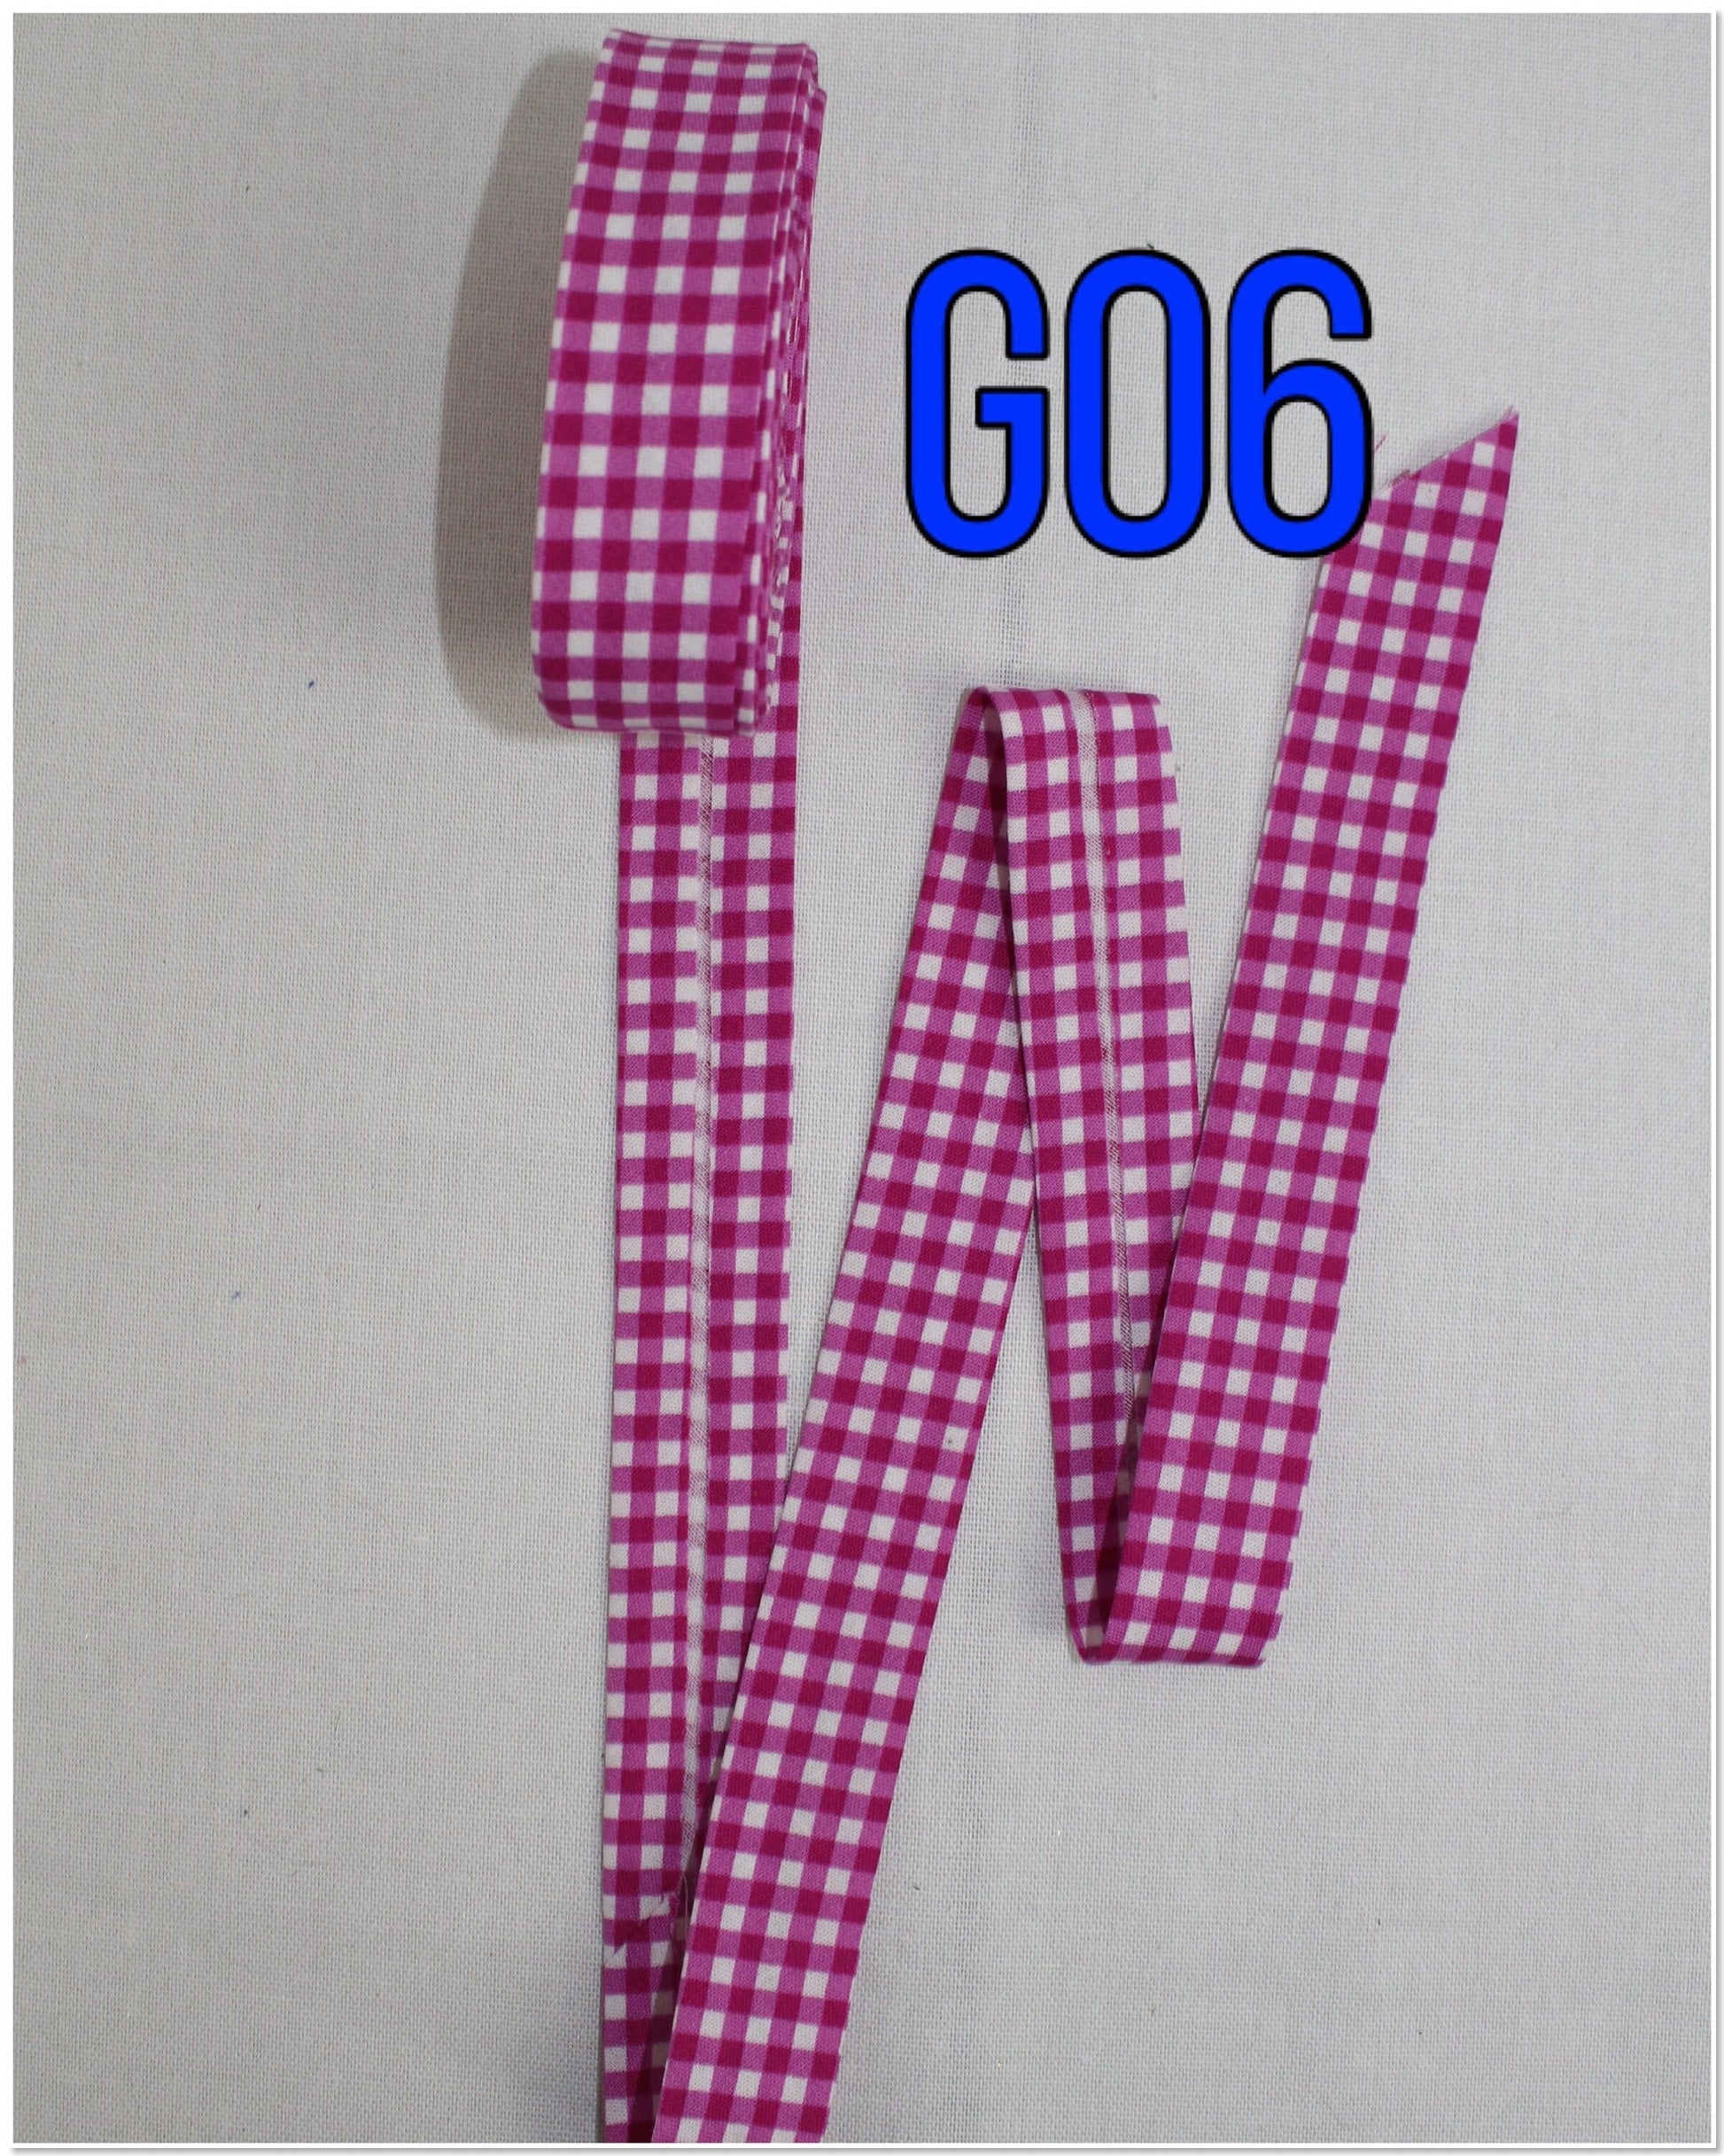 Gingham Bias Binding (tape) 25mm or 12mm, single fold, 100% Cotton. pink, yellow, blue, purple, orange, black. Fusible iron on available.